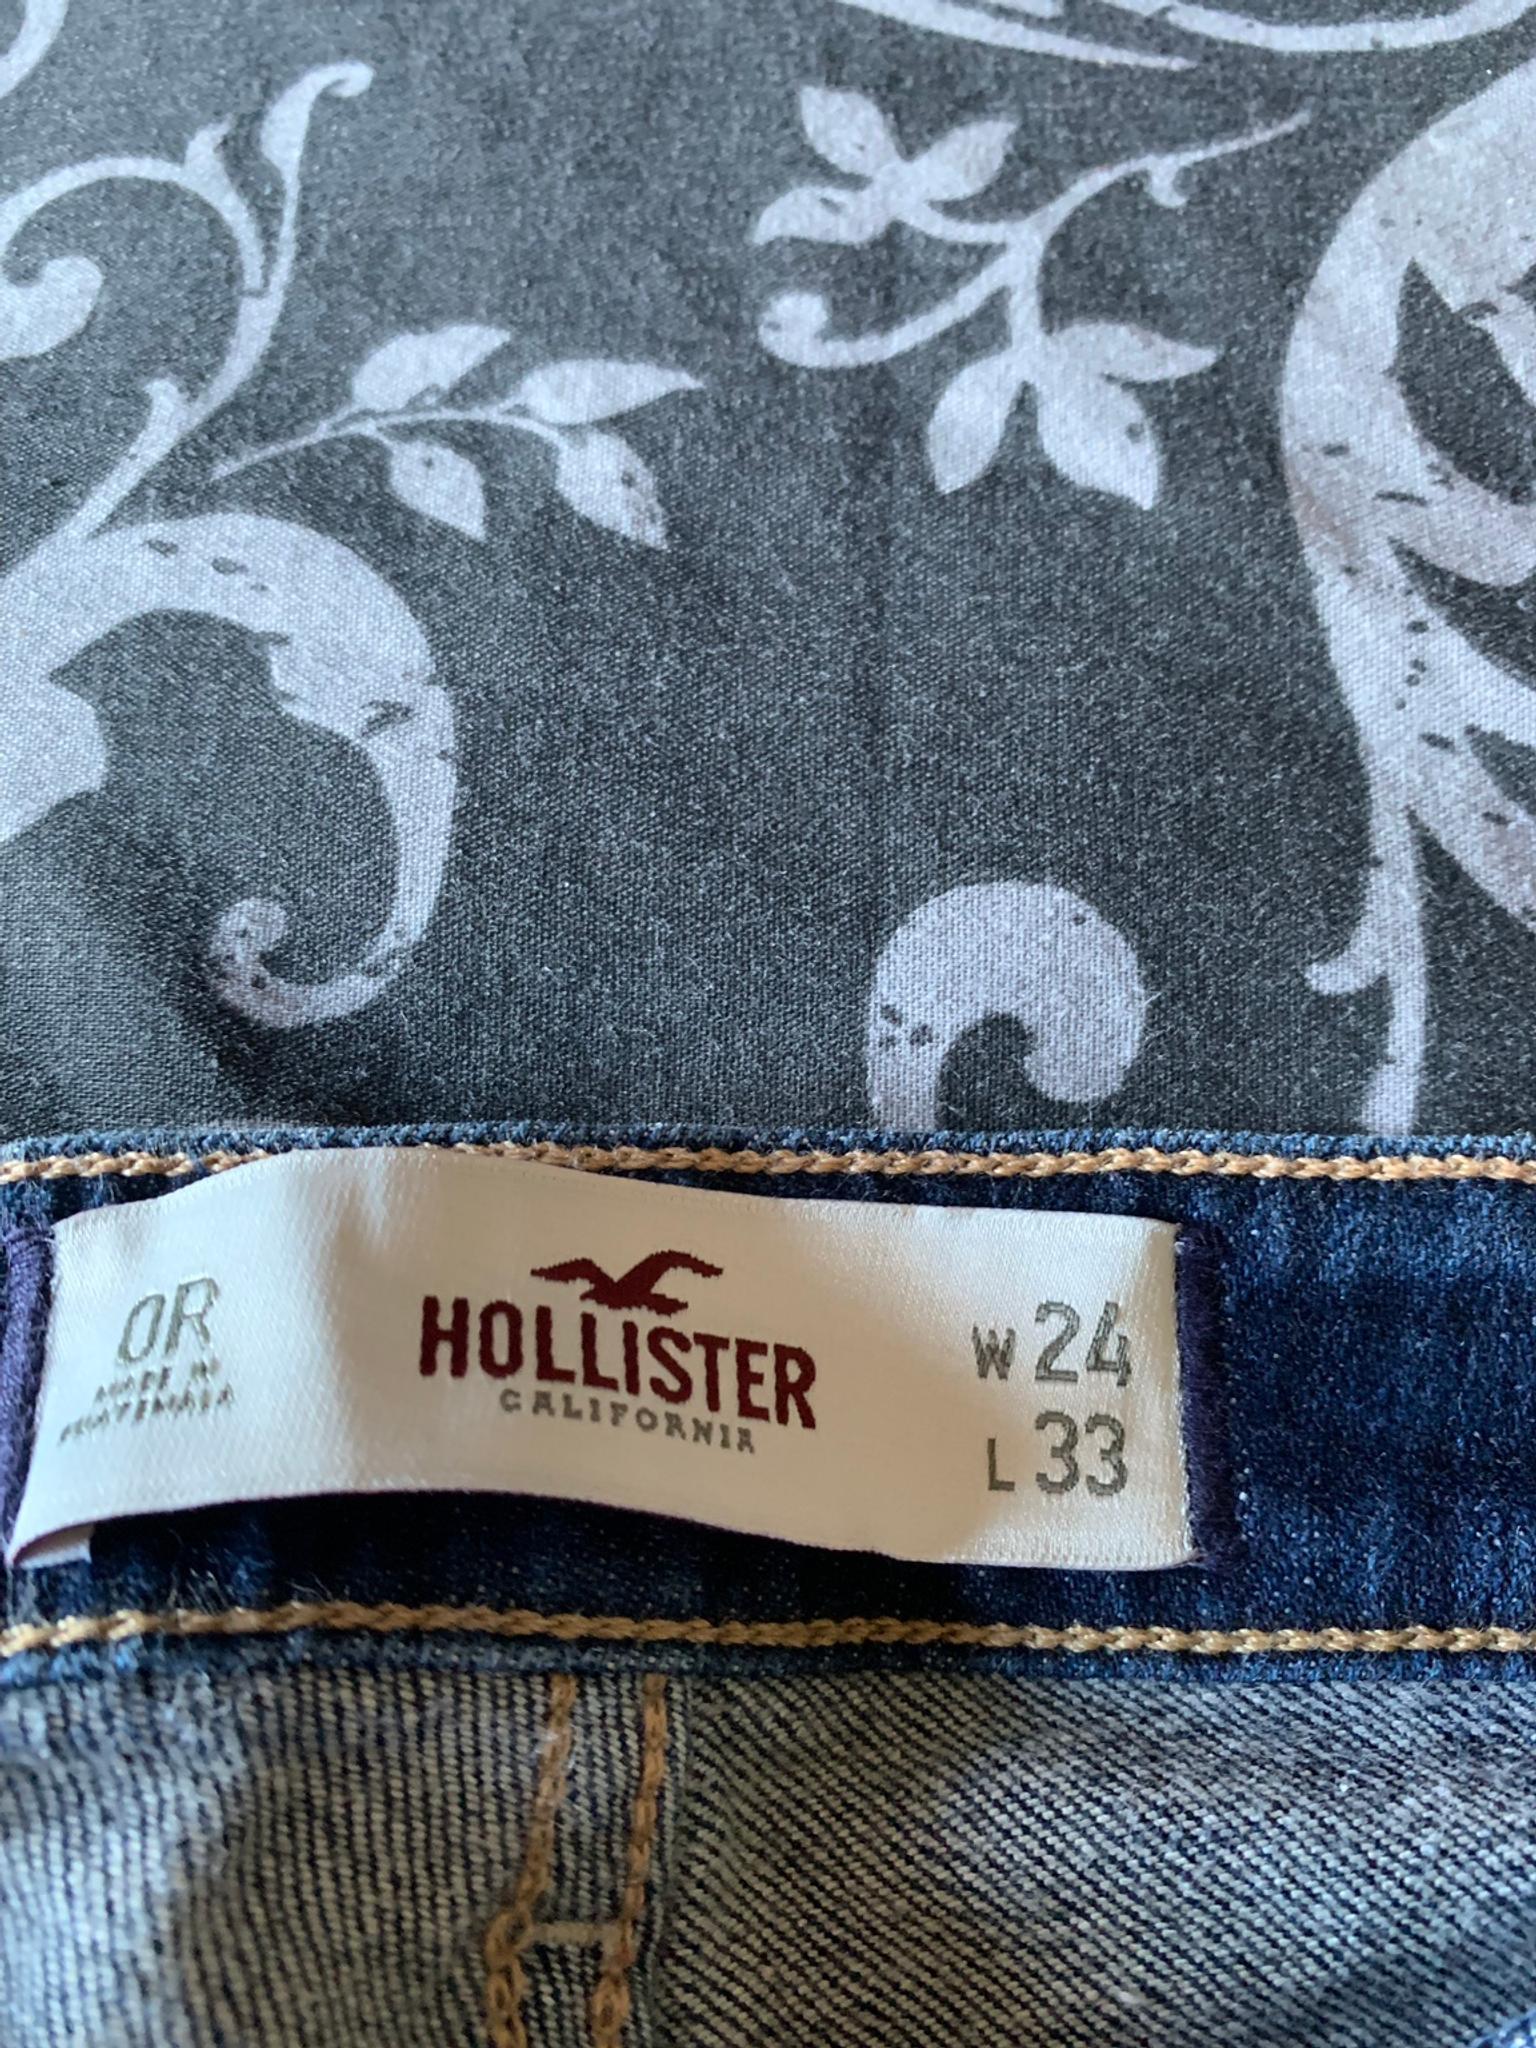 size 8 in hollister jeans